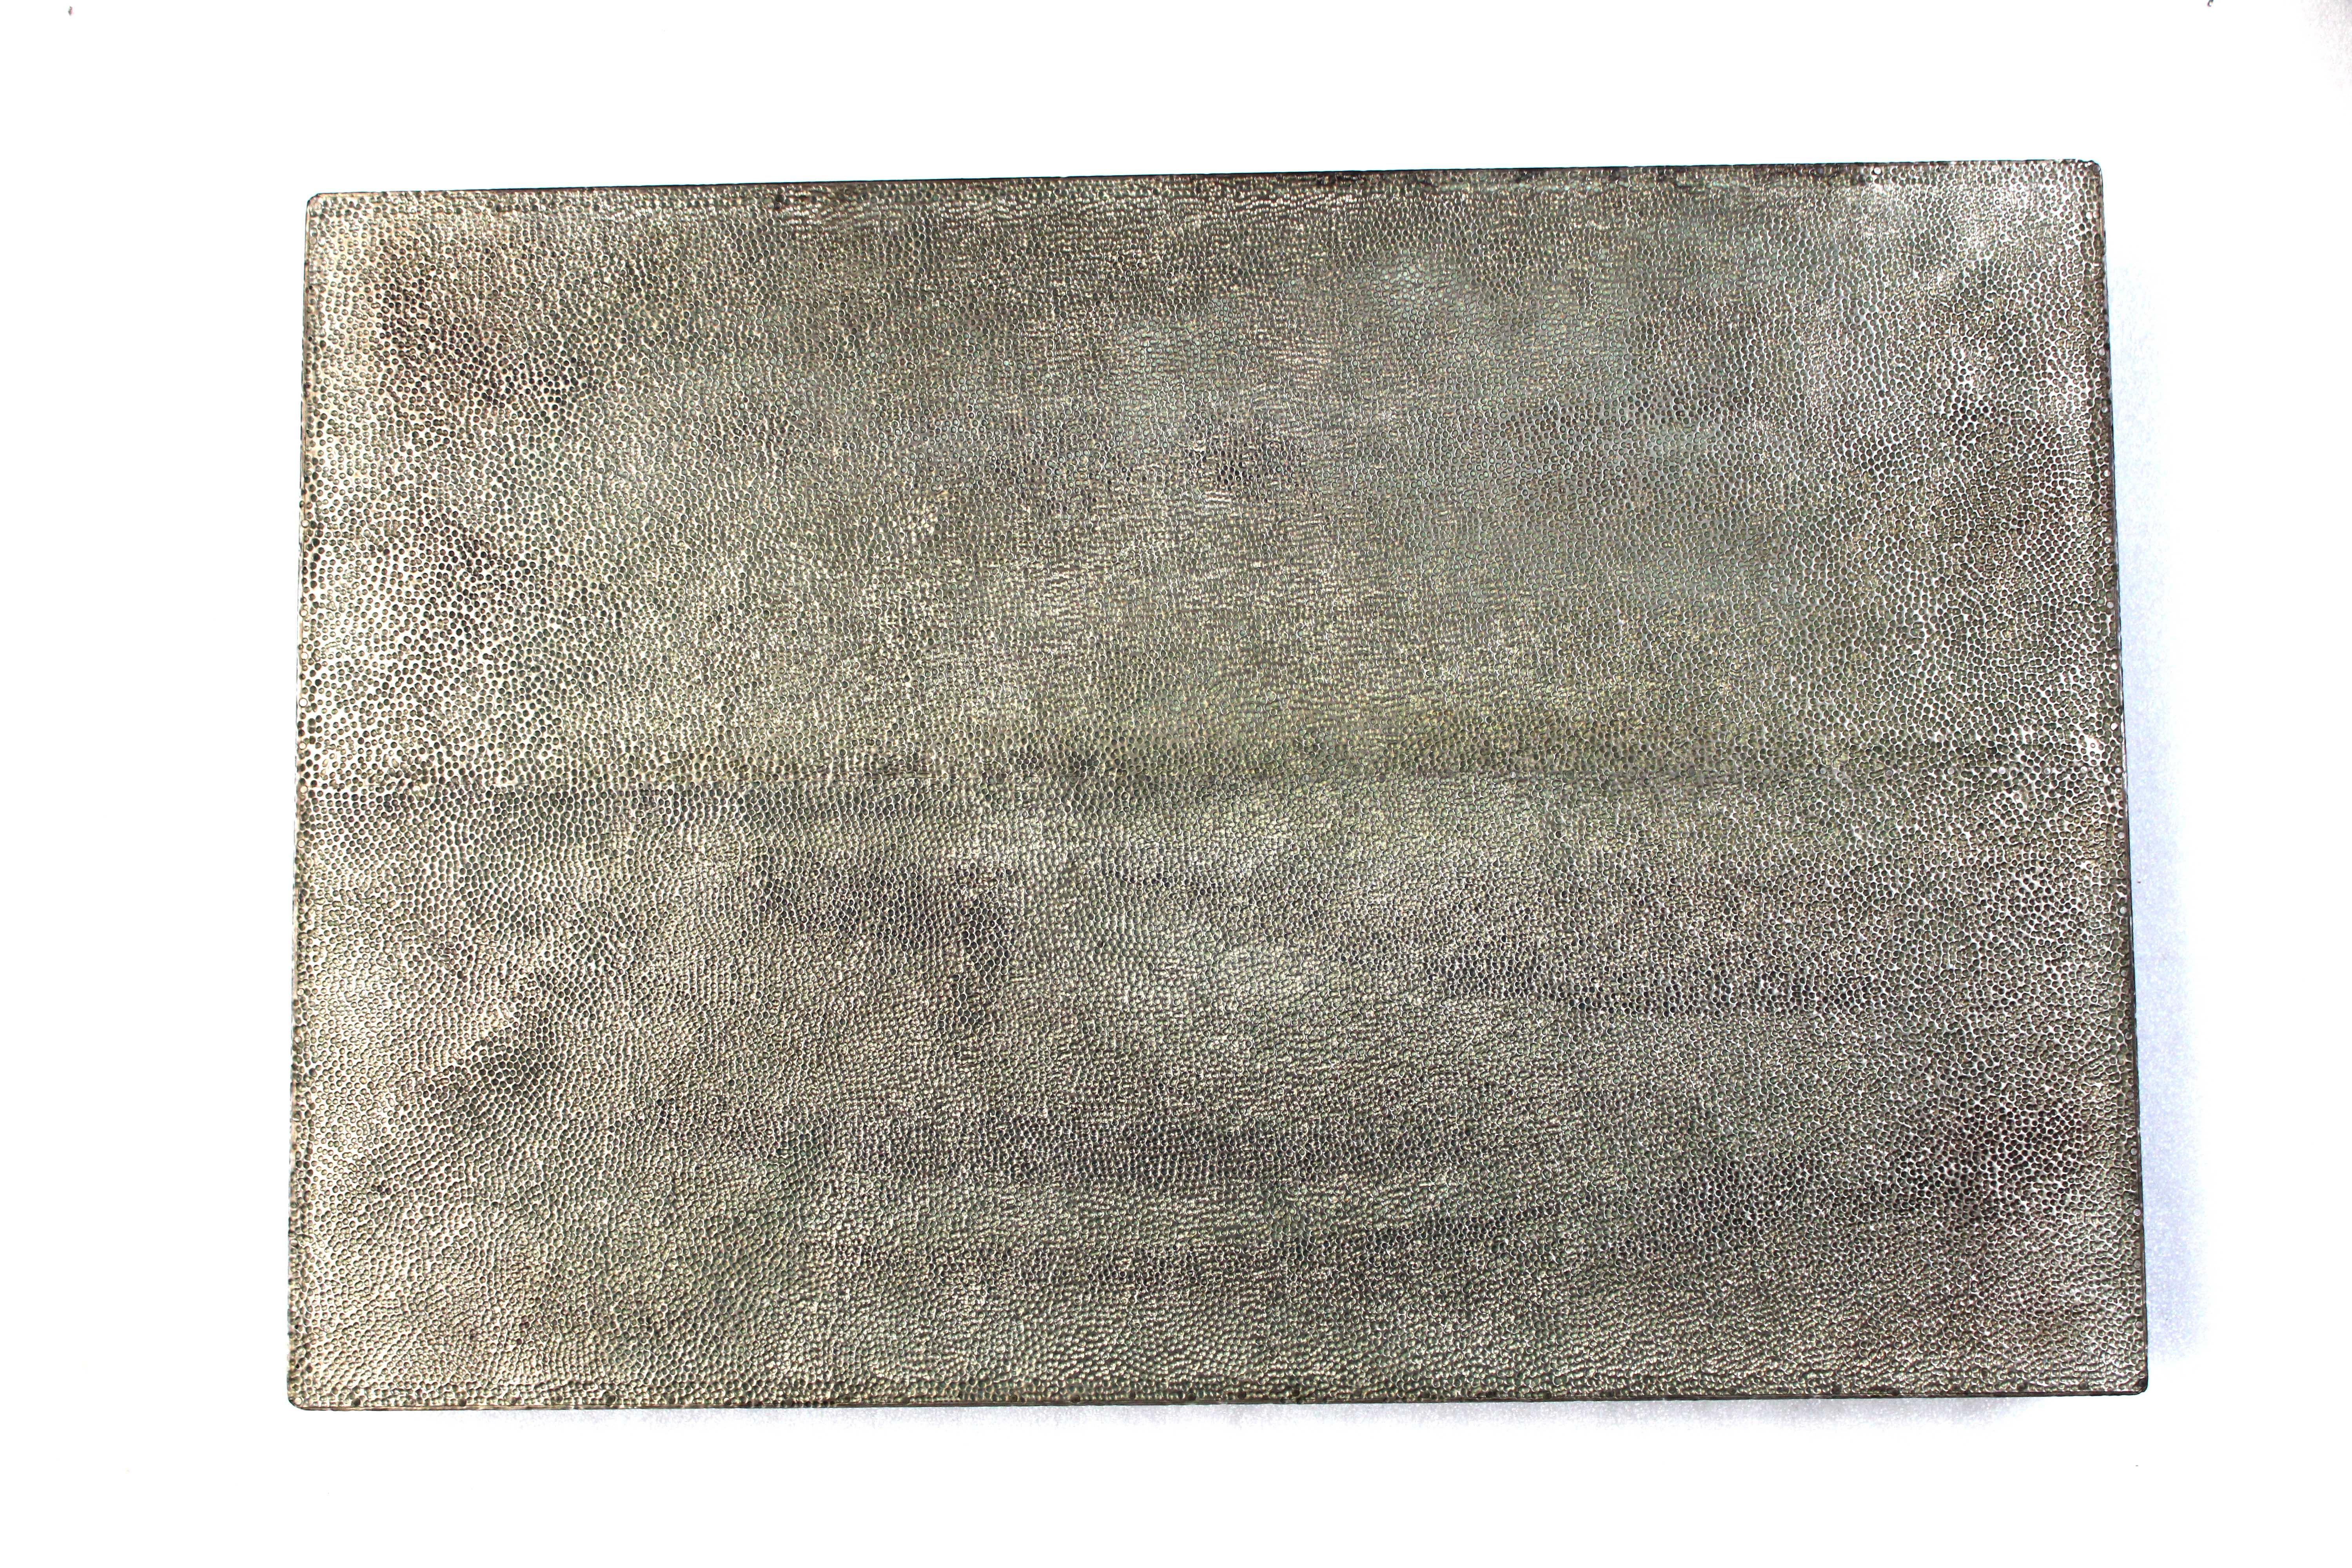 Contemporary Rectangular Metal Tray in Antique Bronze Clad Over MDF by Stephanie Odegard For Sale